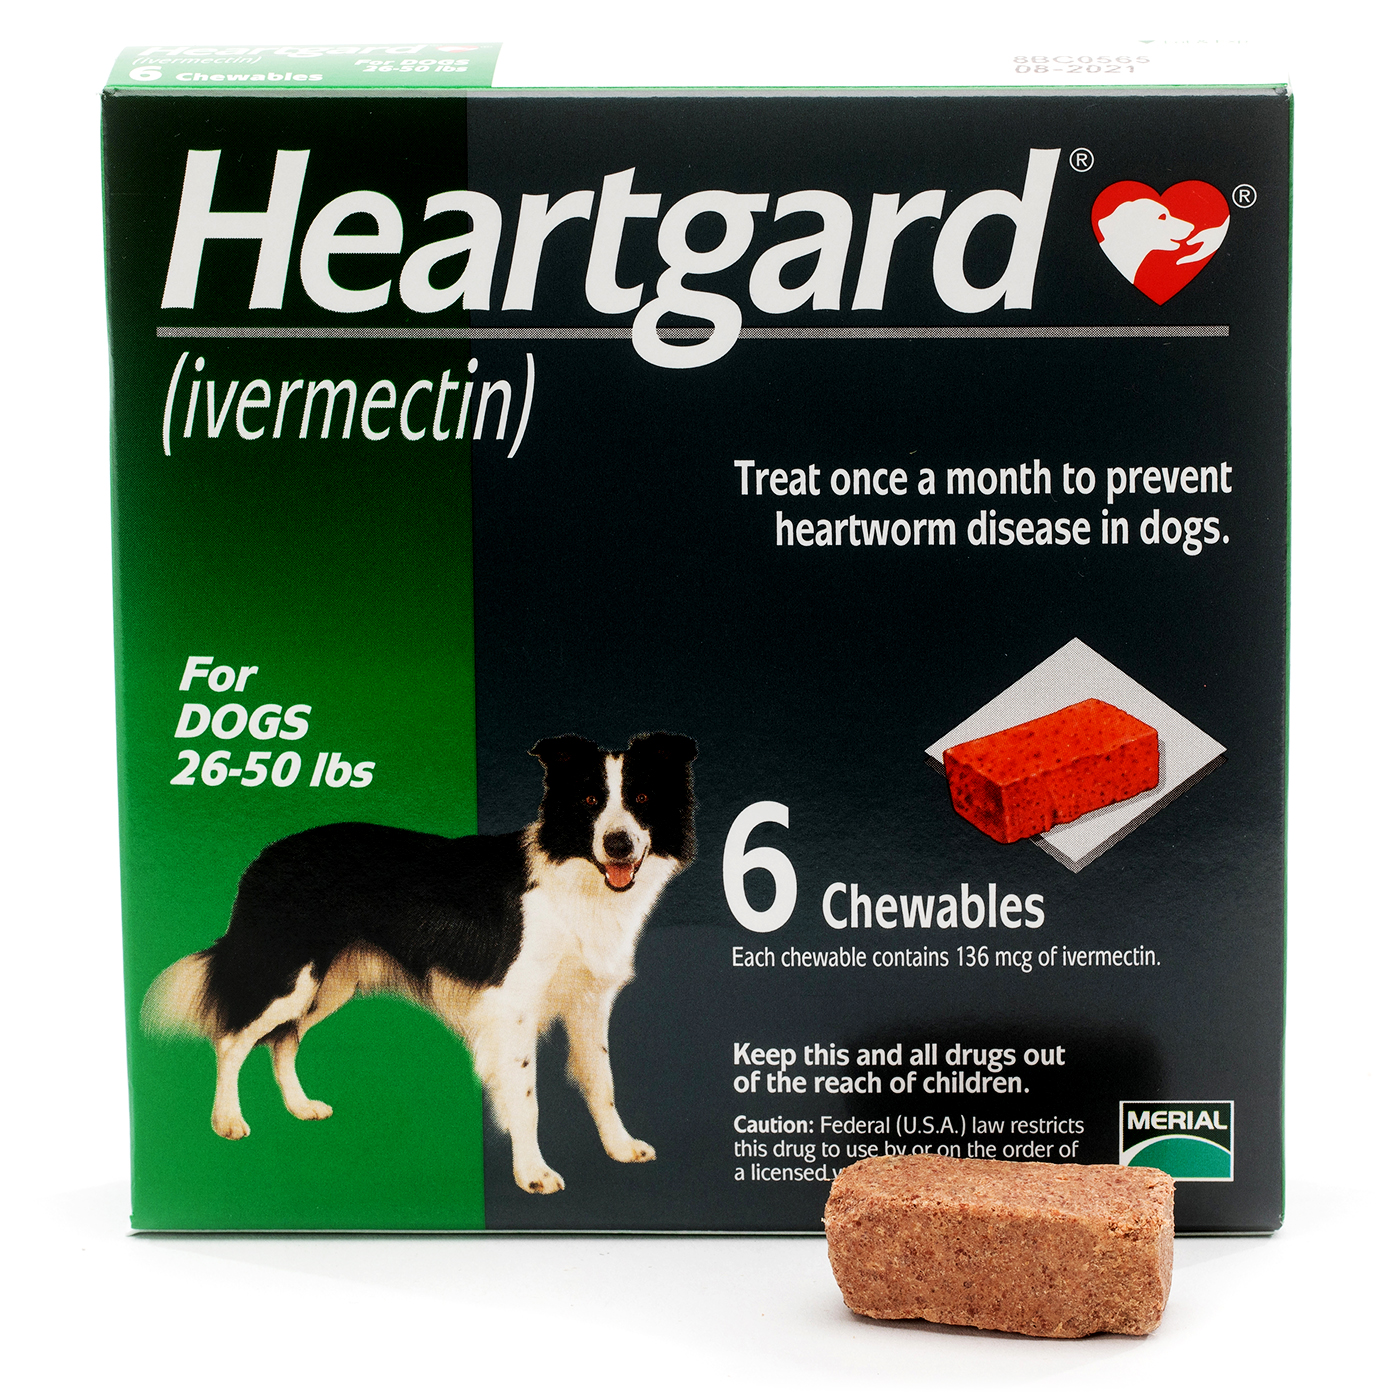 when should i give my puppy heartgard